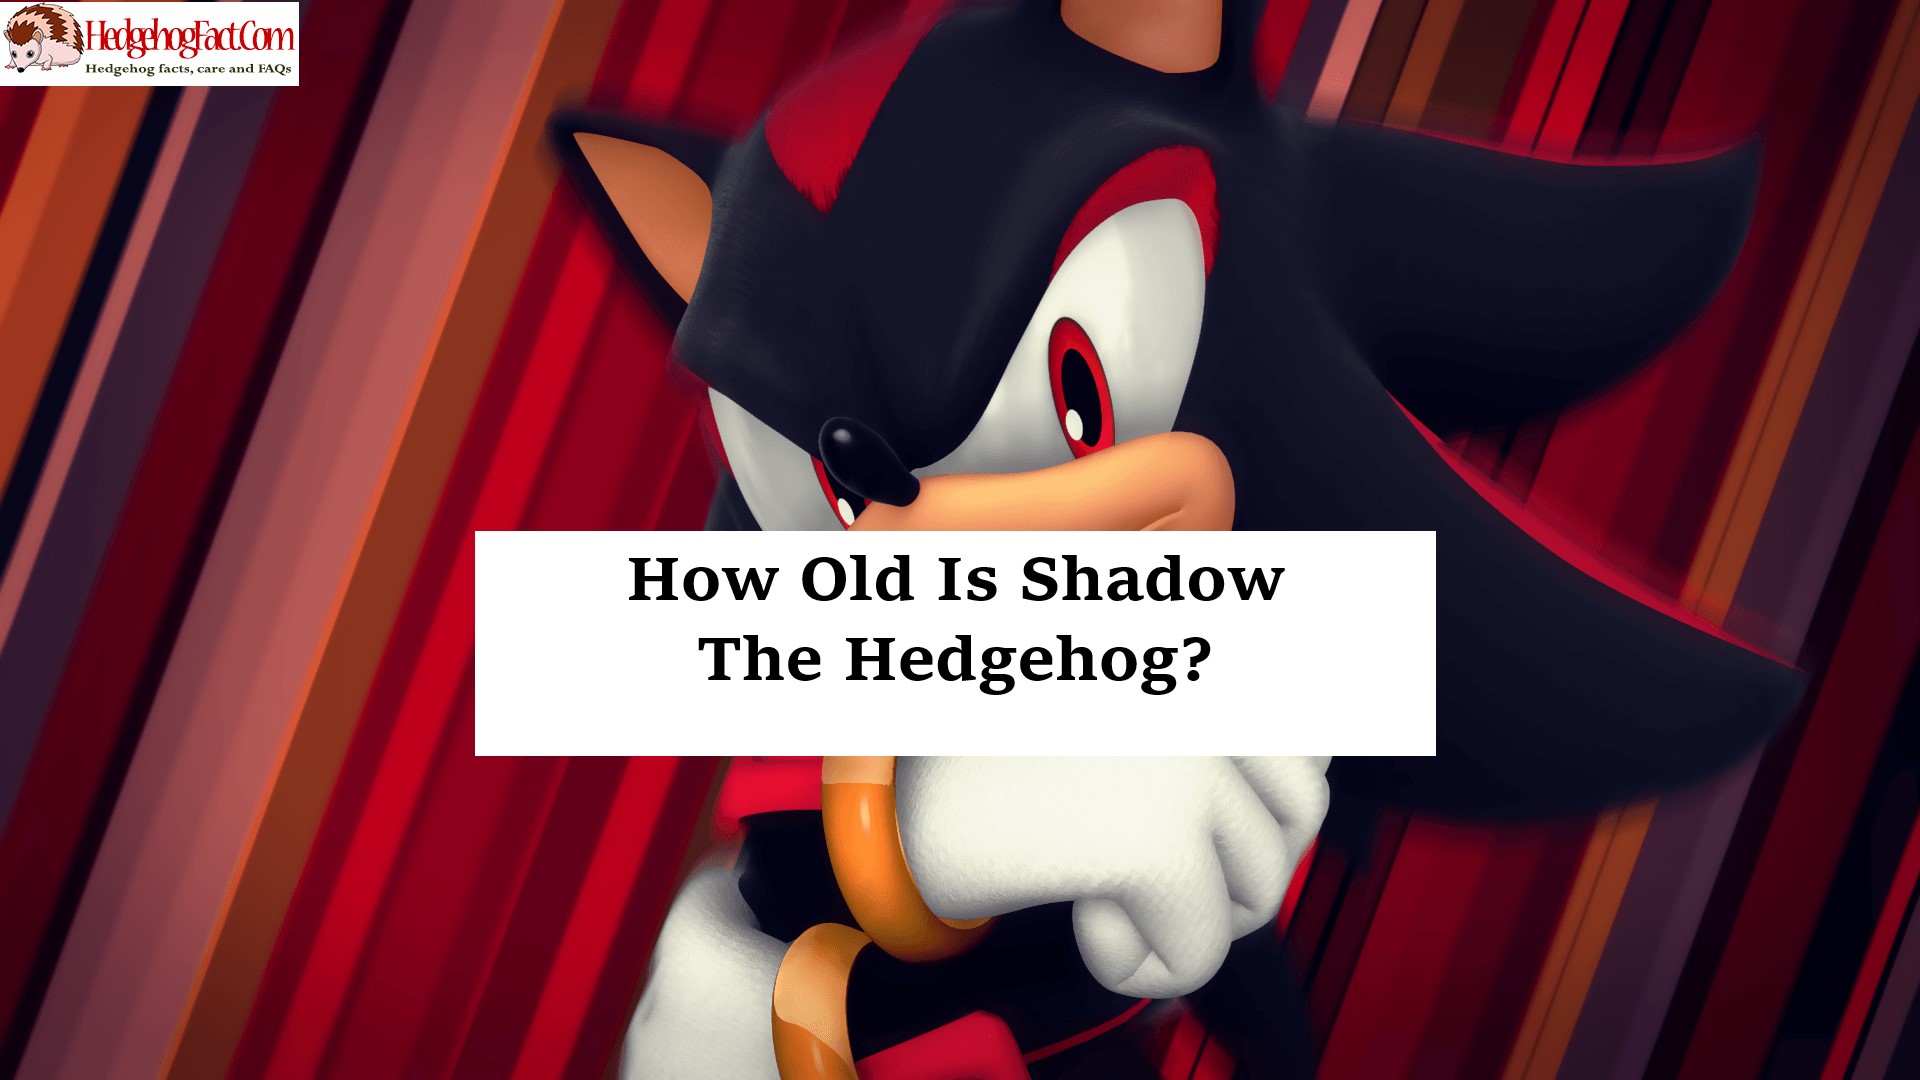 How Old Is Shadow The Hedgehog?